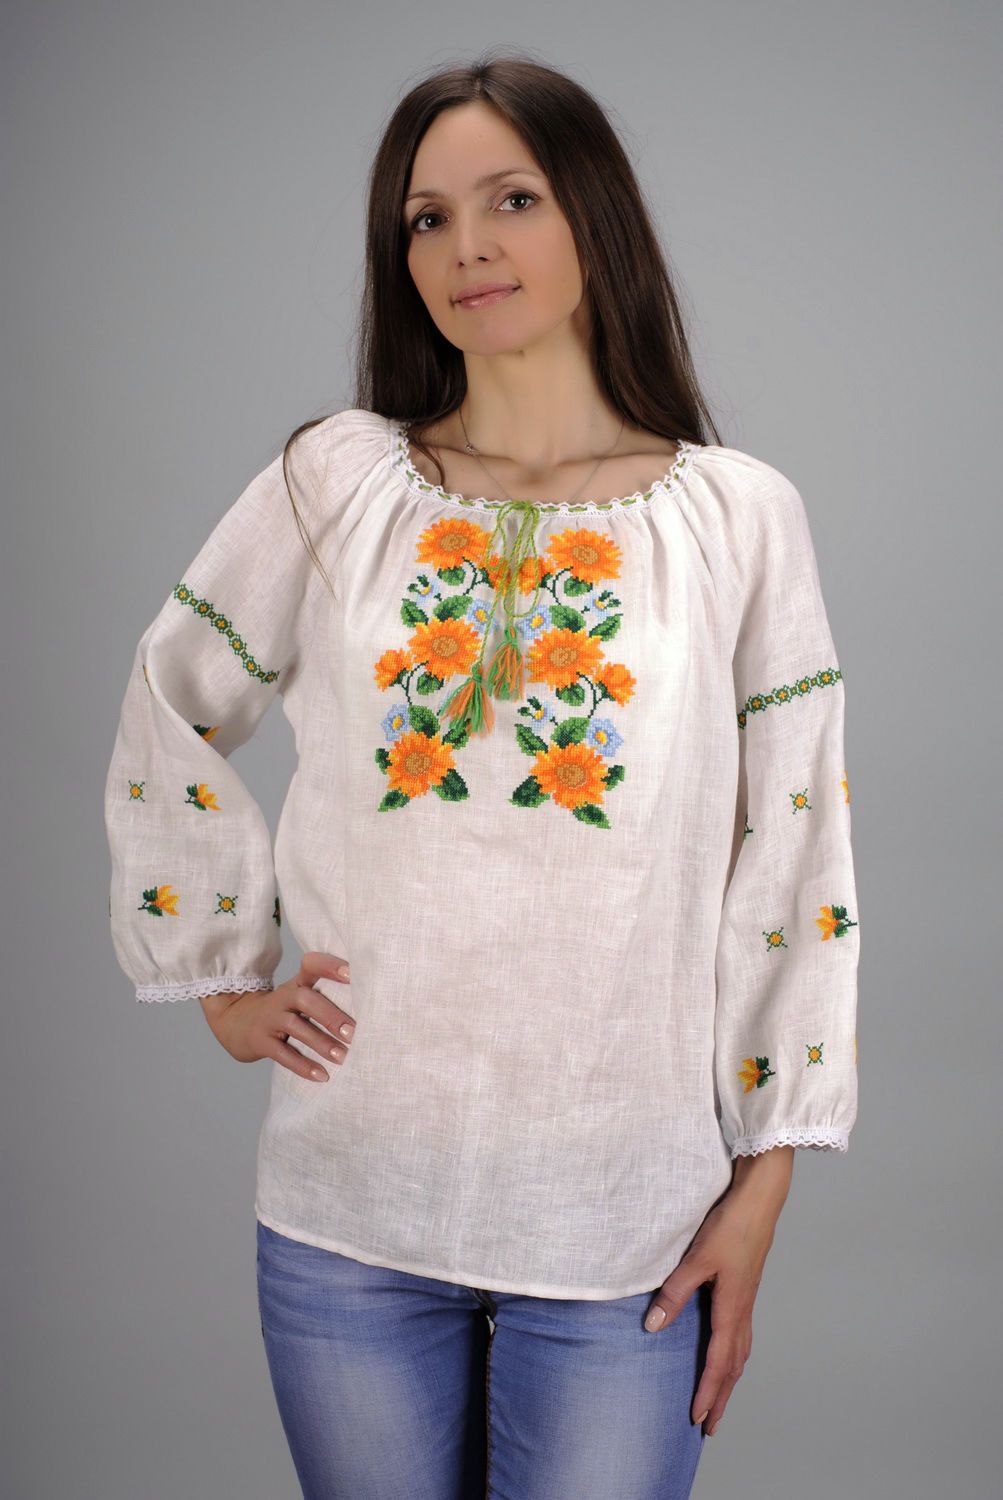 Ethnic tunic made of flax embroidered shirt photo 1